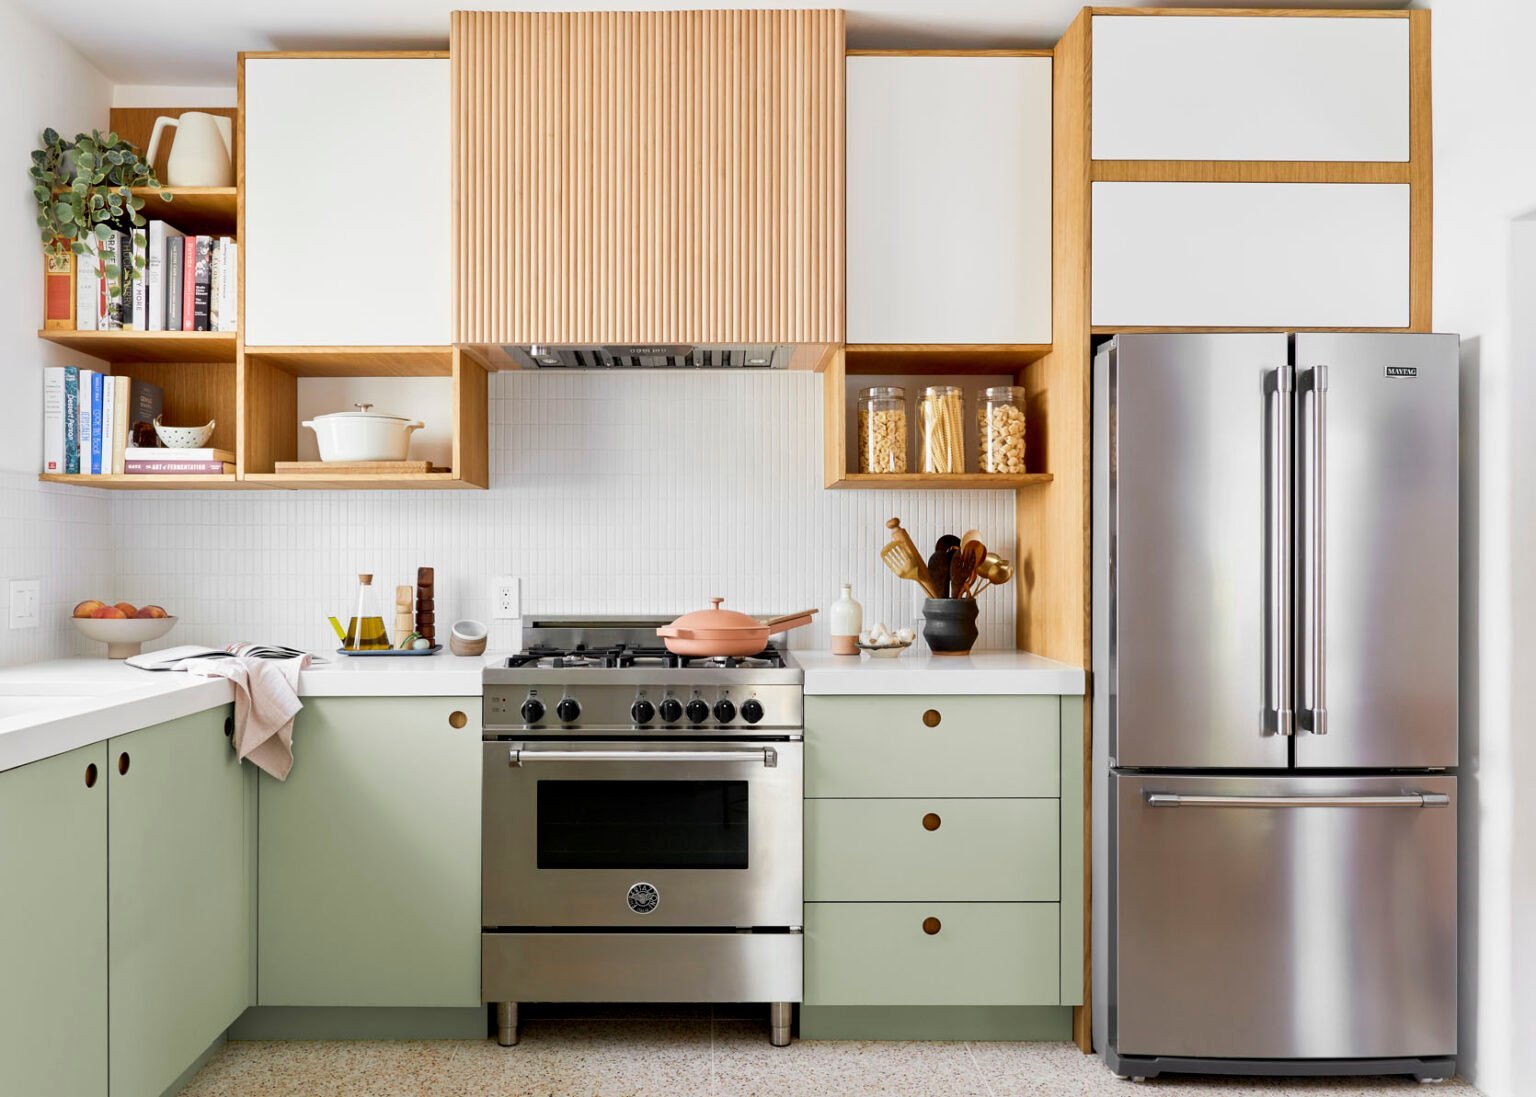 How To Make Your Kitchen Look And Feel Better With These Easy Decor Swaps